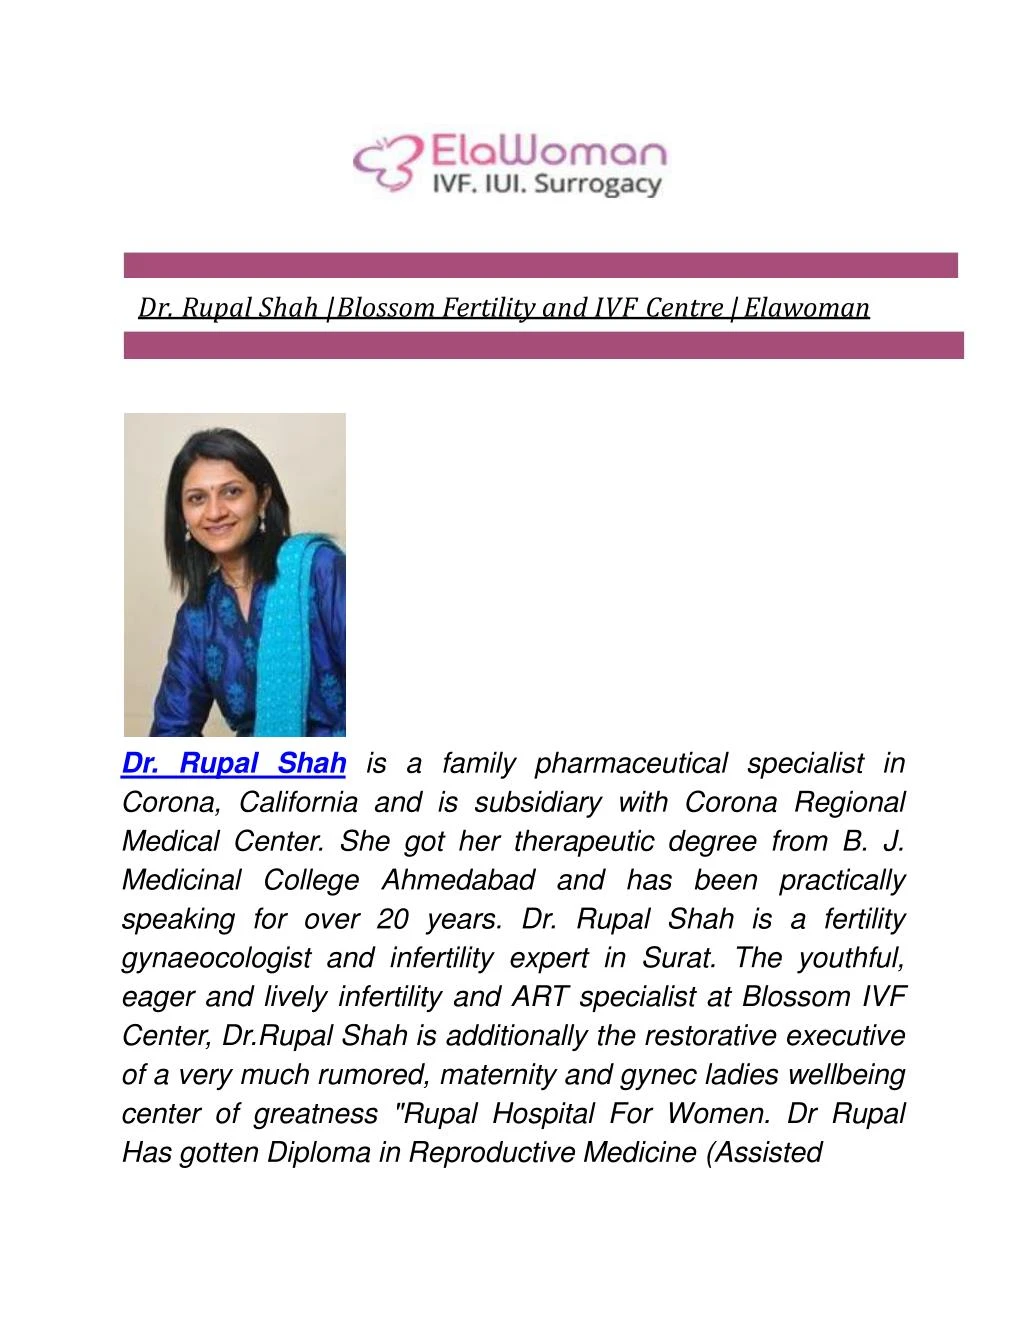 dr rupal shah blossom fertility and ivf centre